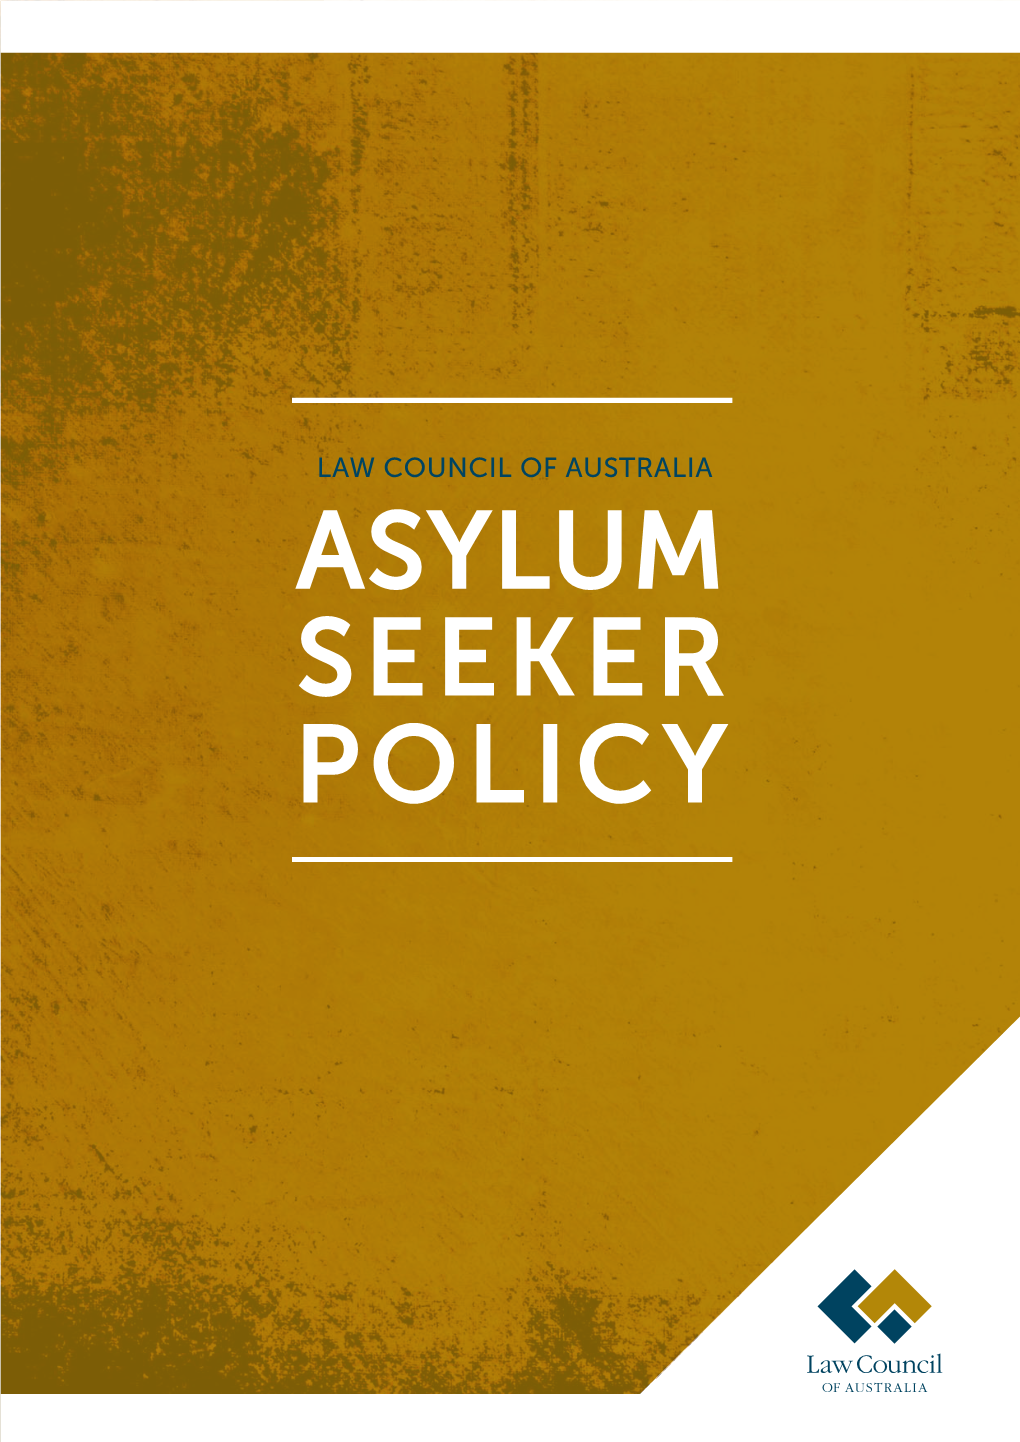 Asylum Seeker Policy Contents